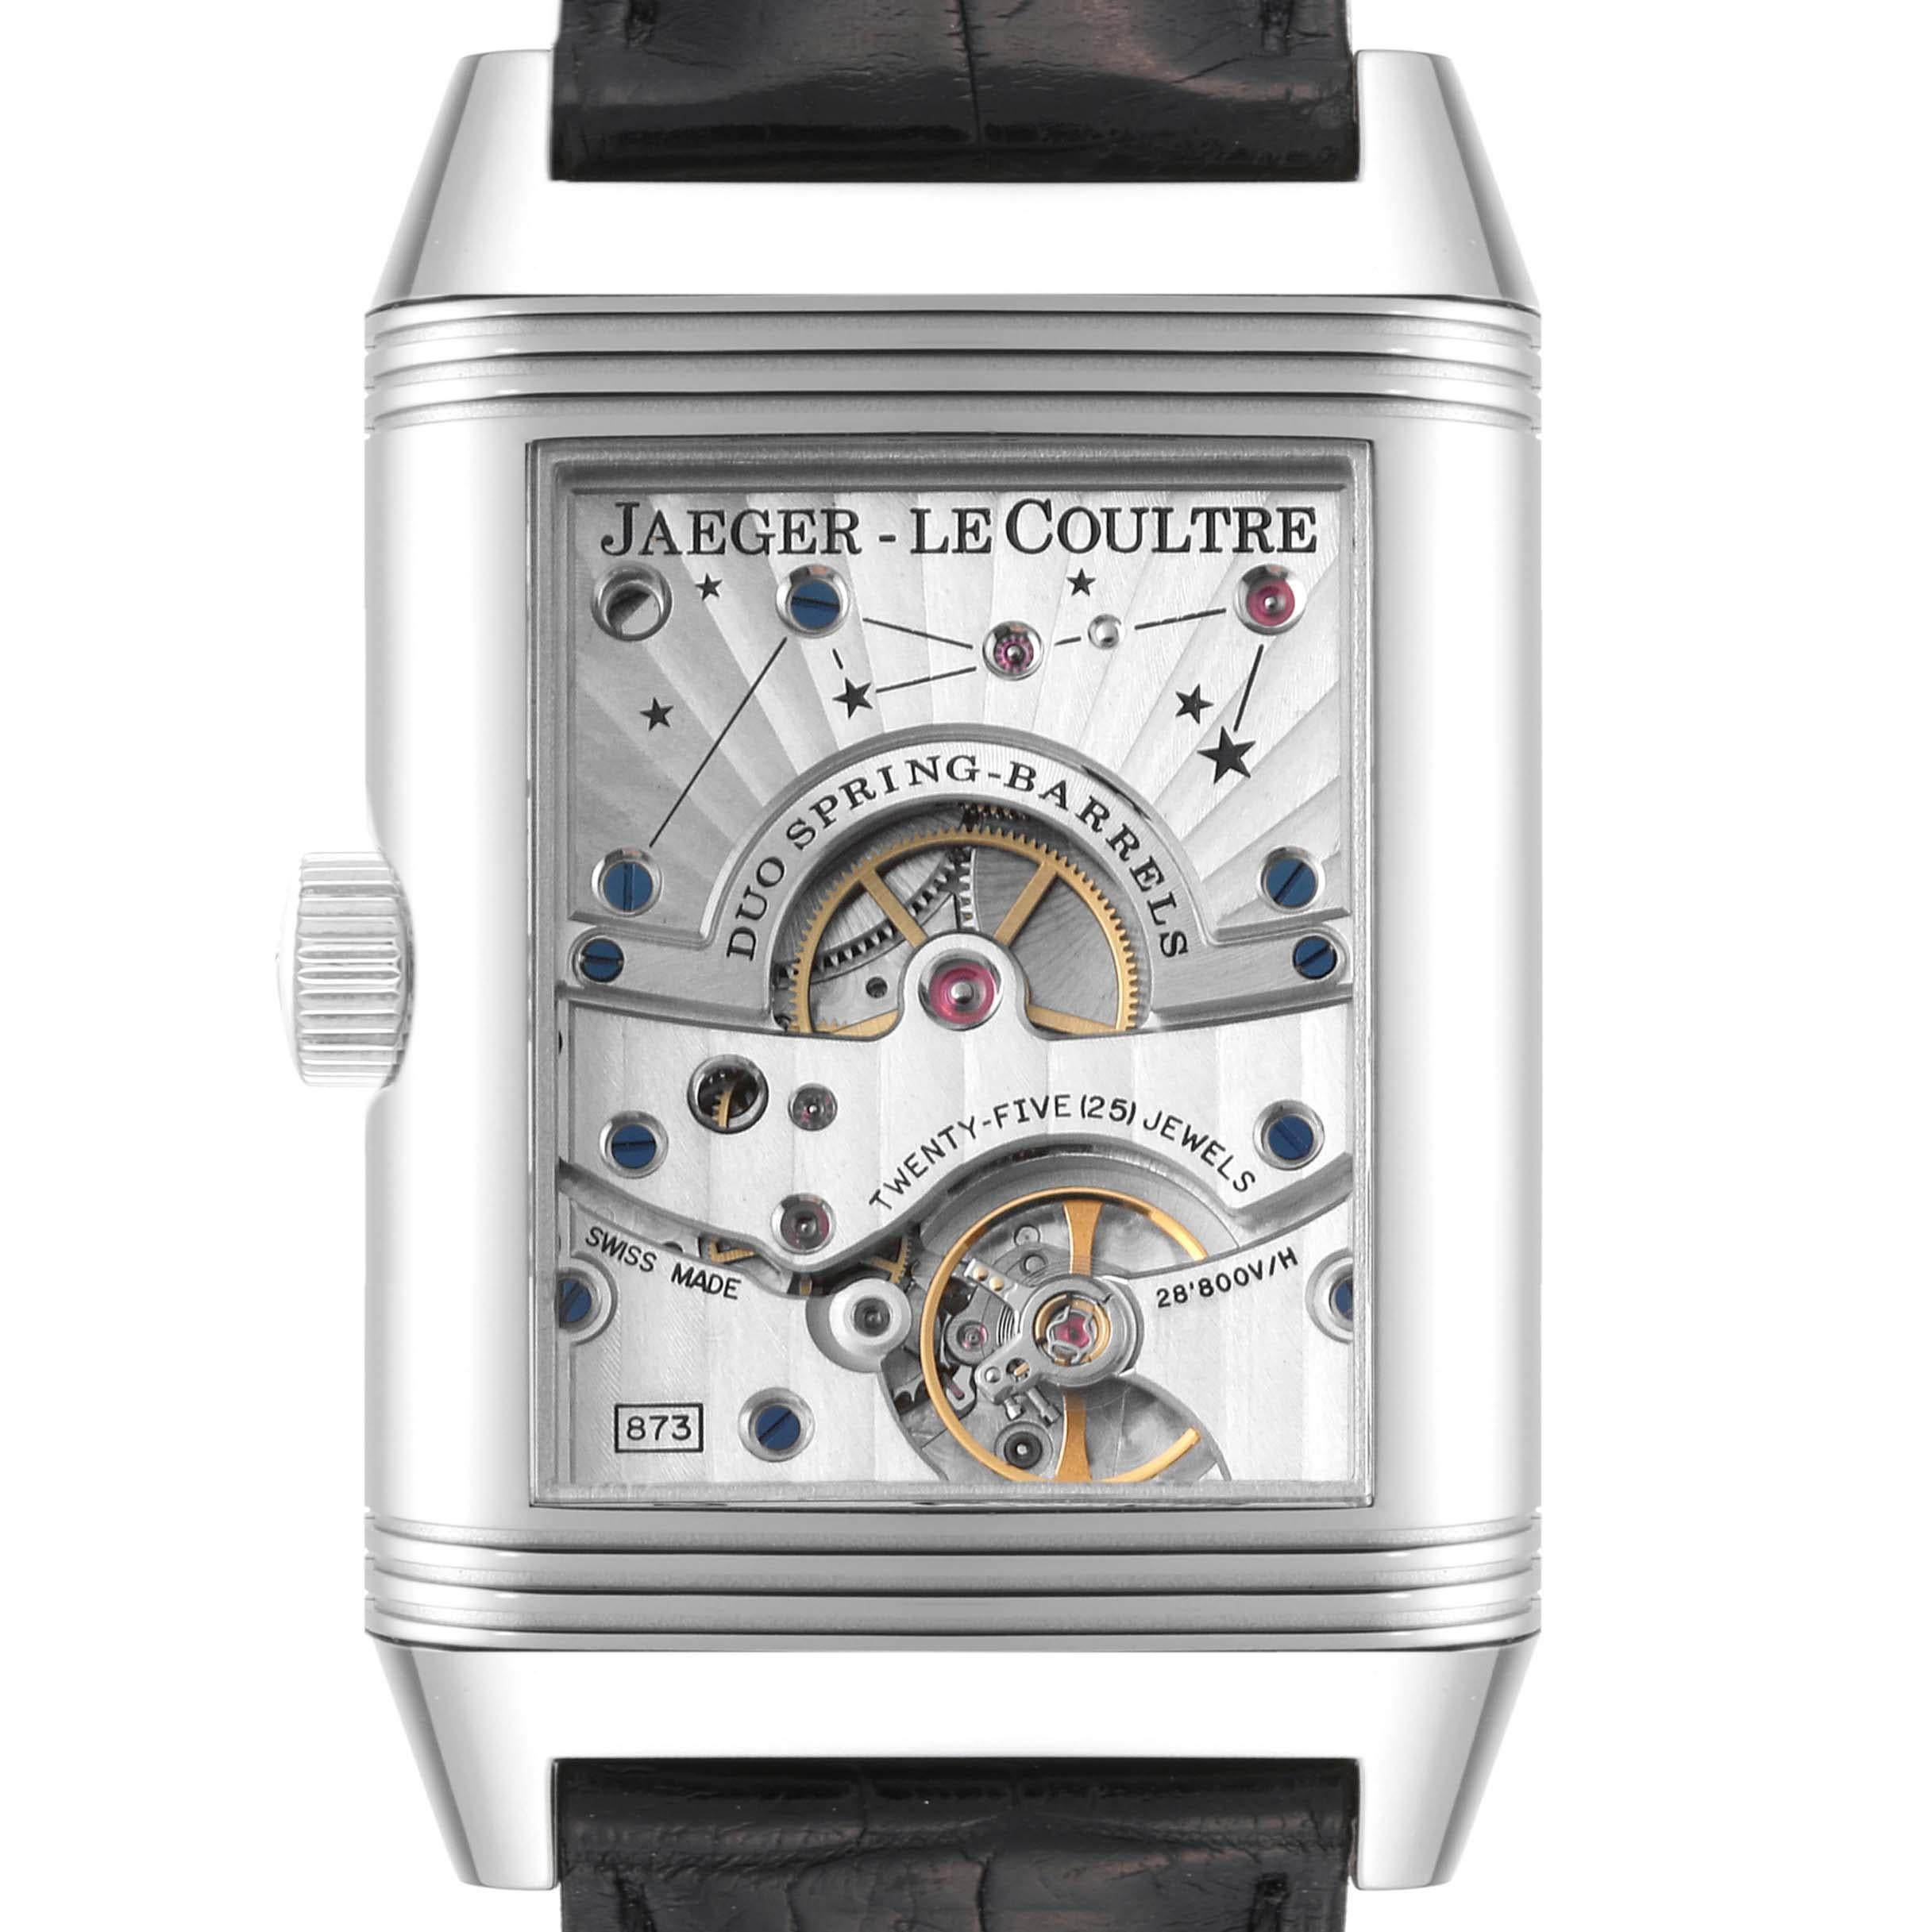 Jaeger LeCoultre Reverso Grande Sun Moon Steel Mens Watch 240.8.27 Q3048420. Manual winding movement with 8 day power reserve. Stainless steel 47.0 x 29.0 mm rectangular rotating case. Inner transparent exhibition sapphire crystal caseback.